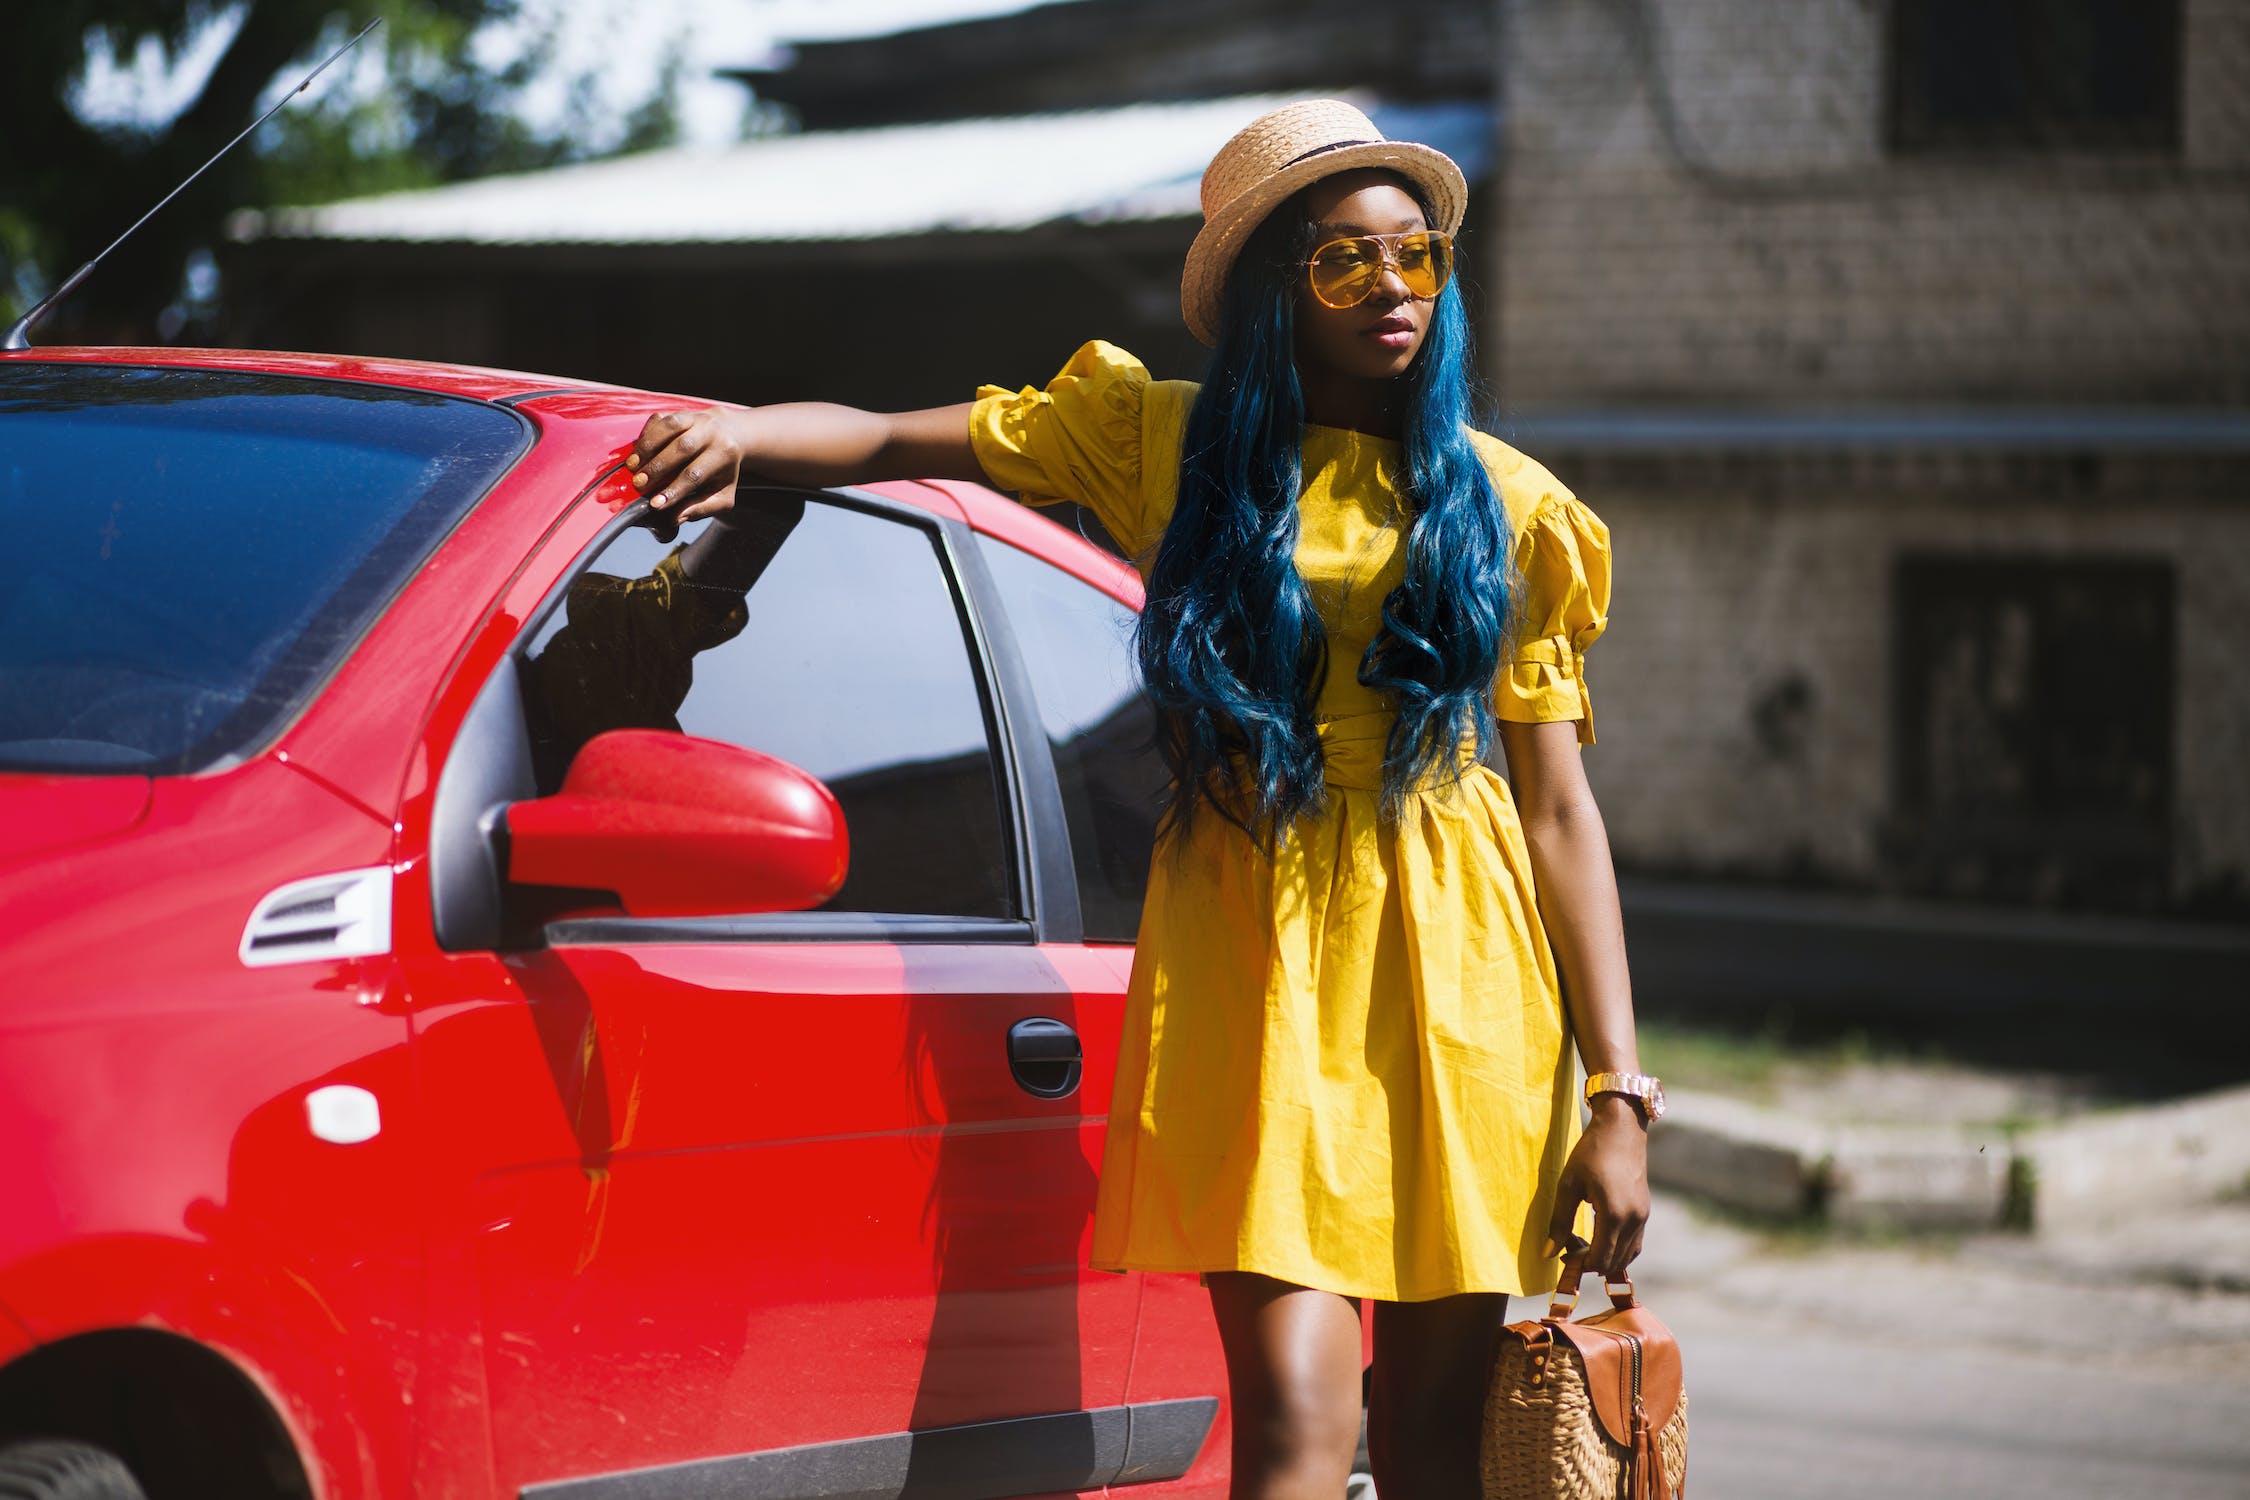 A vibrant image featuring a young woman wearing a sunny yellow dress with striking blue hair, set against the backdrop of a bold red car. 